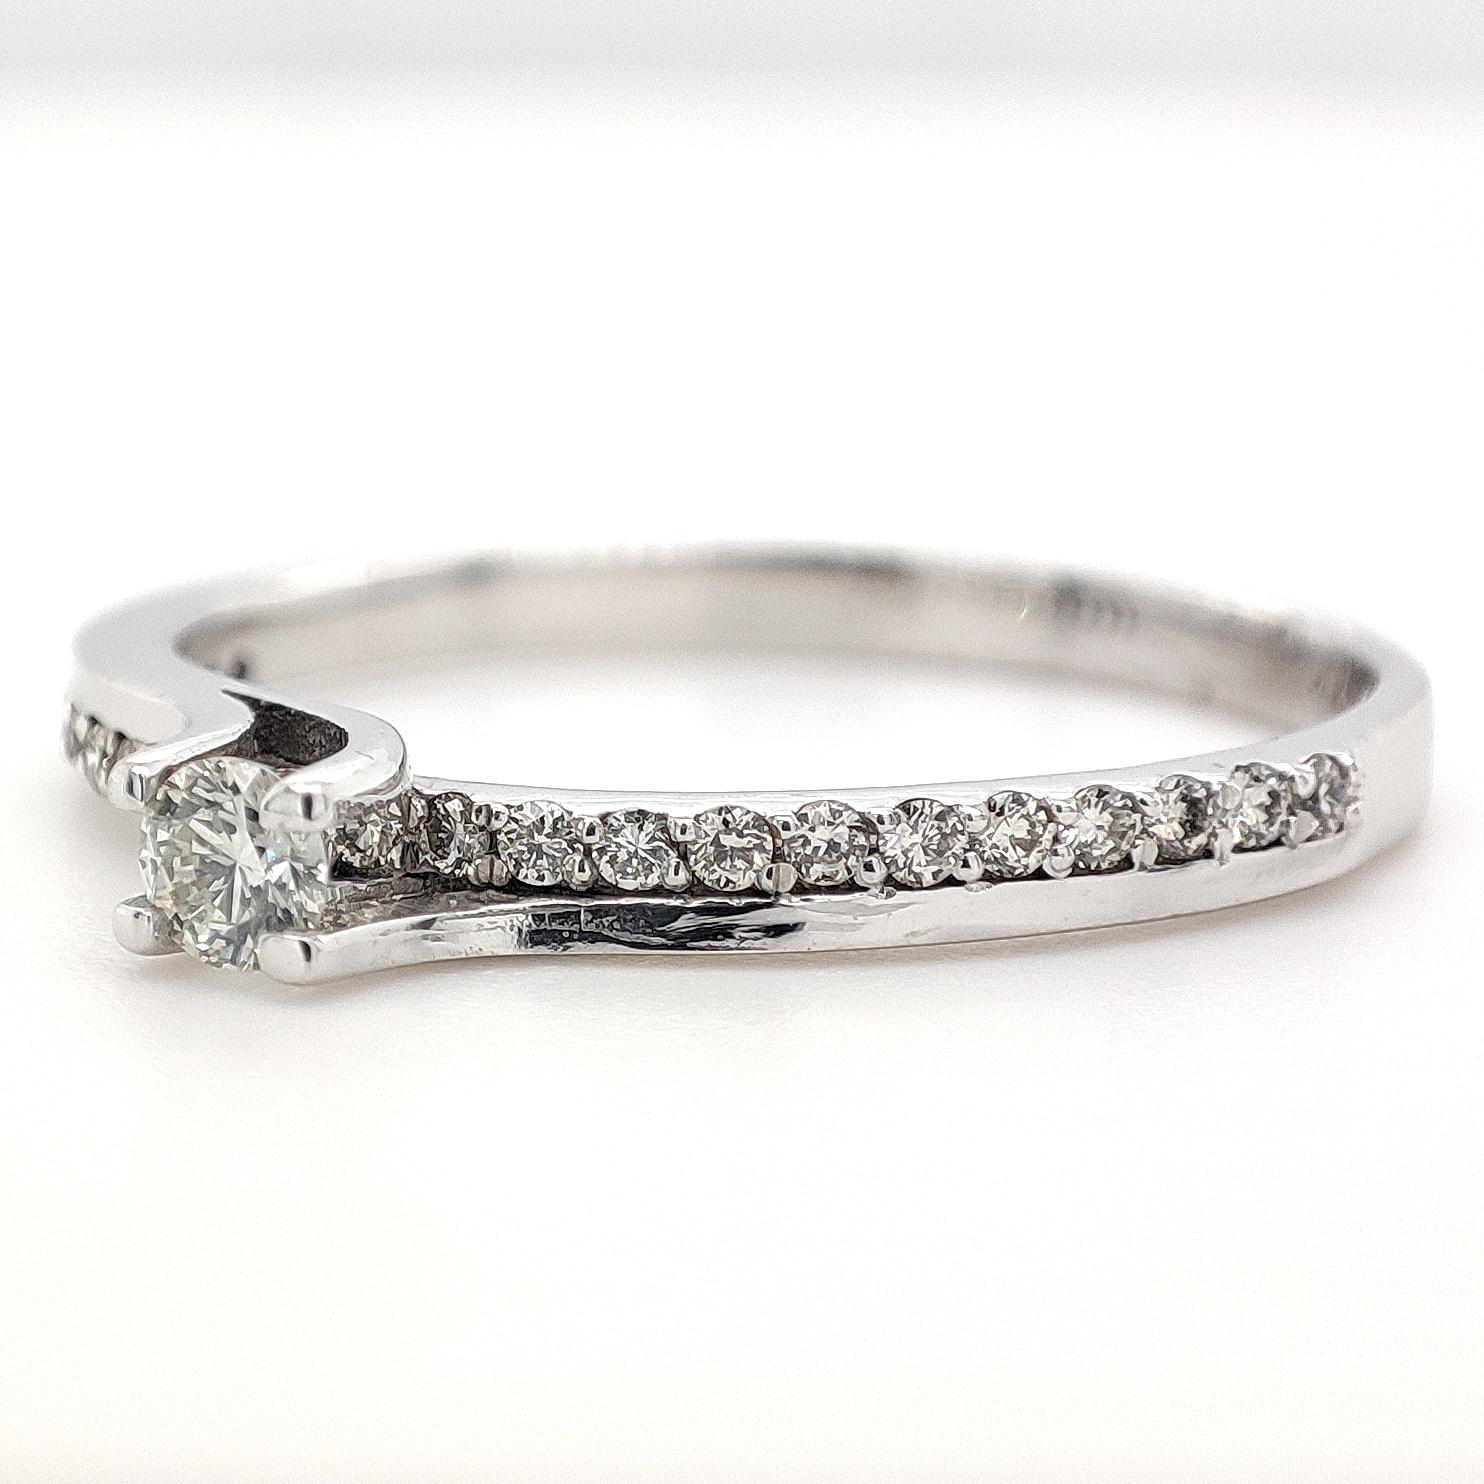 FOR US CUSTOMER NO VAT!

This charming engagement diamond ring is adorned with a total of 0.24 carats distributed across 24 diamonds, set delicately in a 14K white gold band. The diamonds boast exceptional clarity falling within the VS1 to VS2